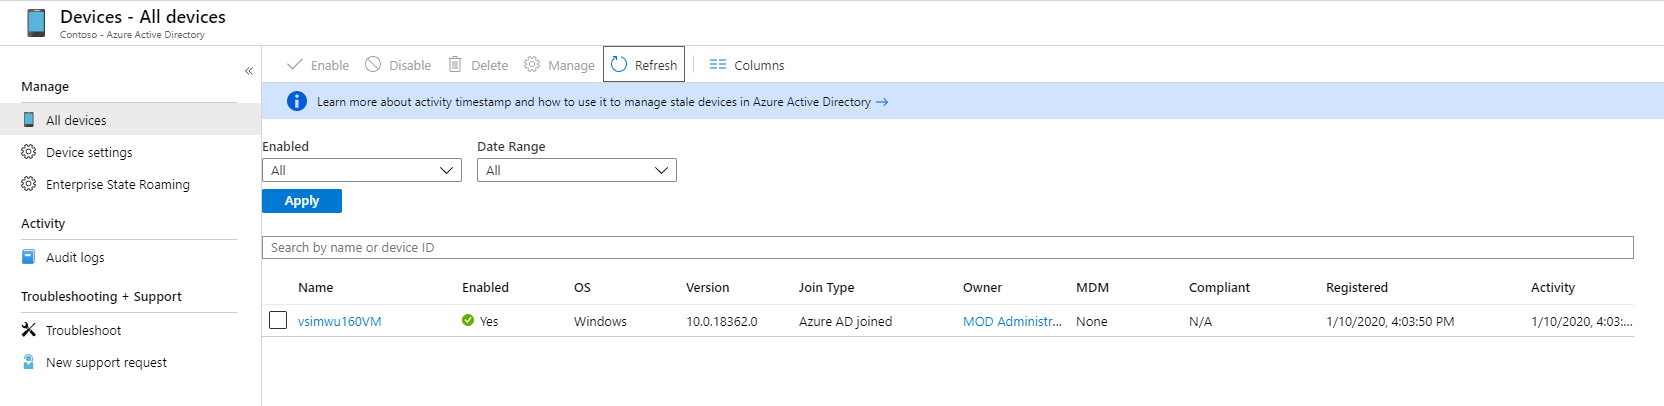 Cannot sign in Win 10 with AAD joined Office 365 f2541b26-452a-4a32-82d9-527d48af3e2e?upload=true.png